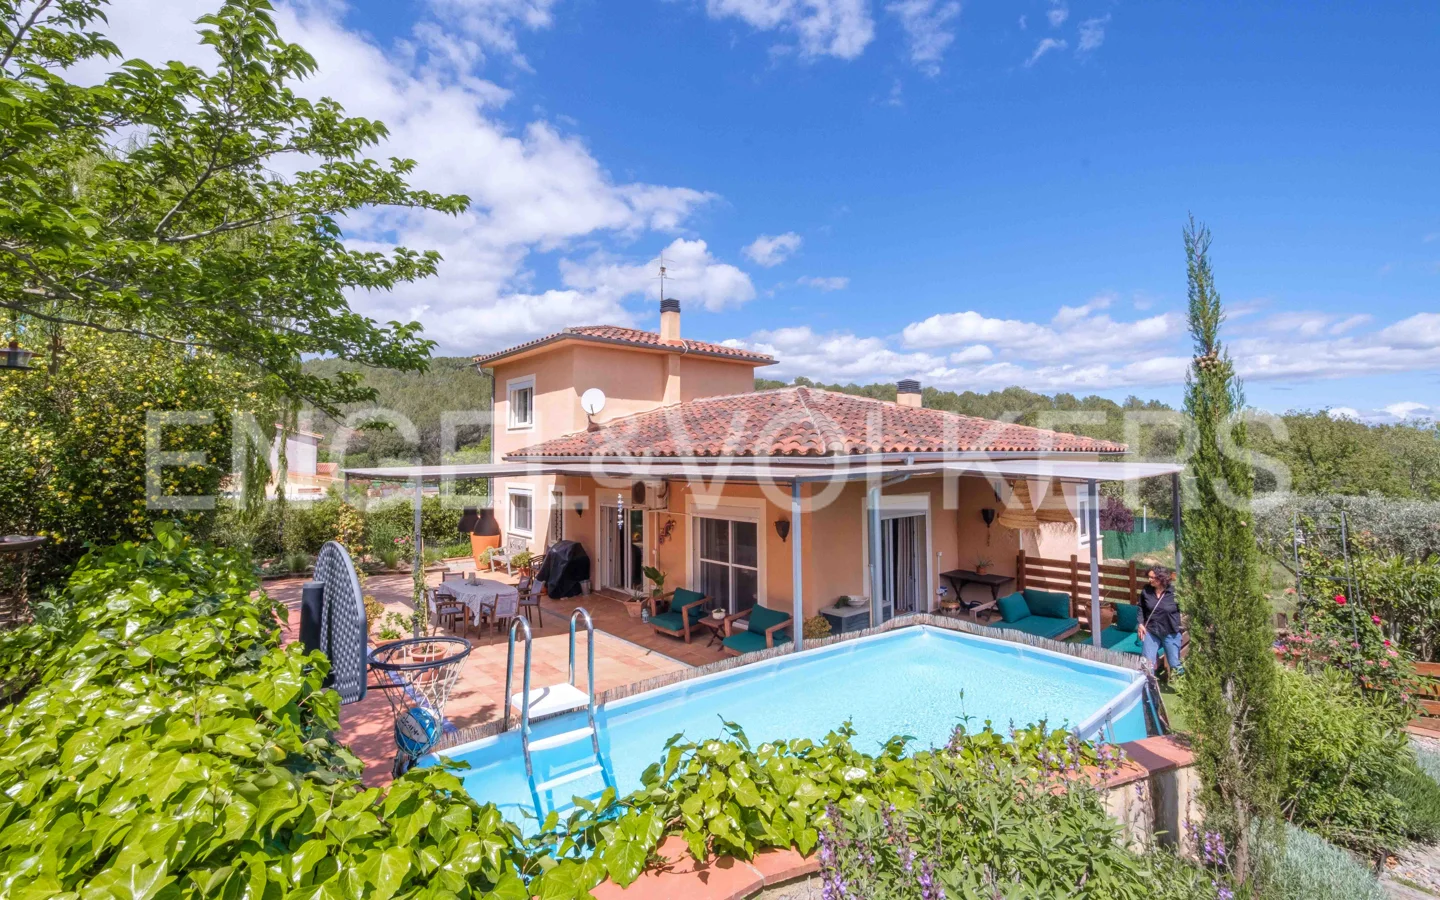 Charming house in a natural and quiet environment in Pla de l'Estany